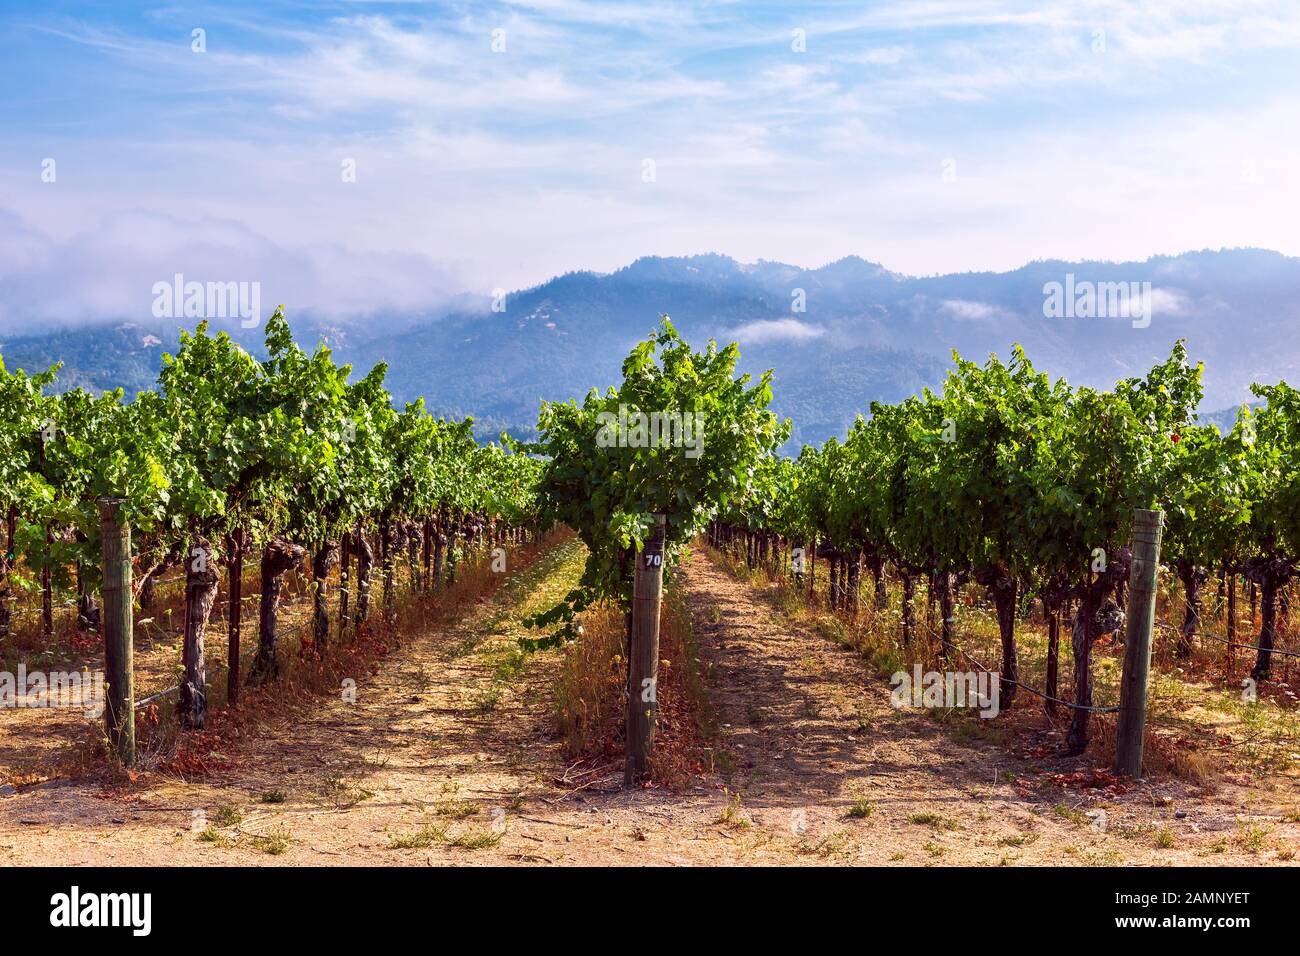 Rows of grapes growing in a vineyard in Napa Valley, California Stock Photo